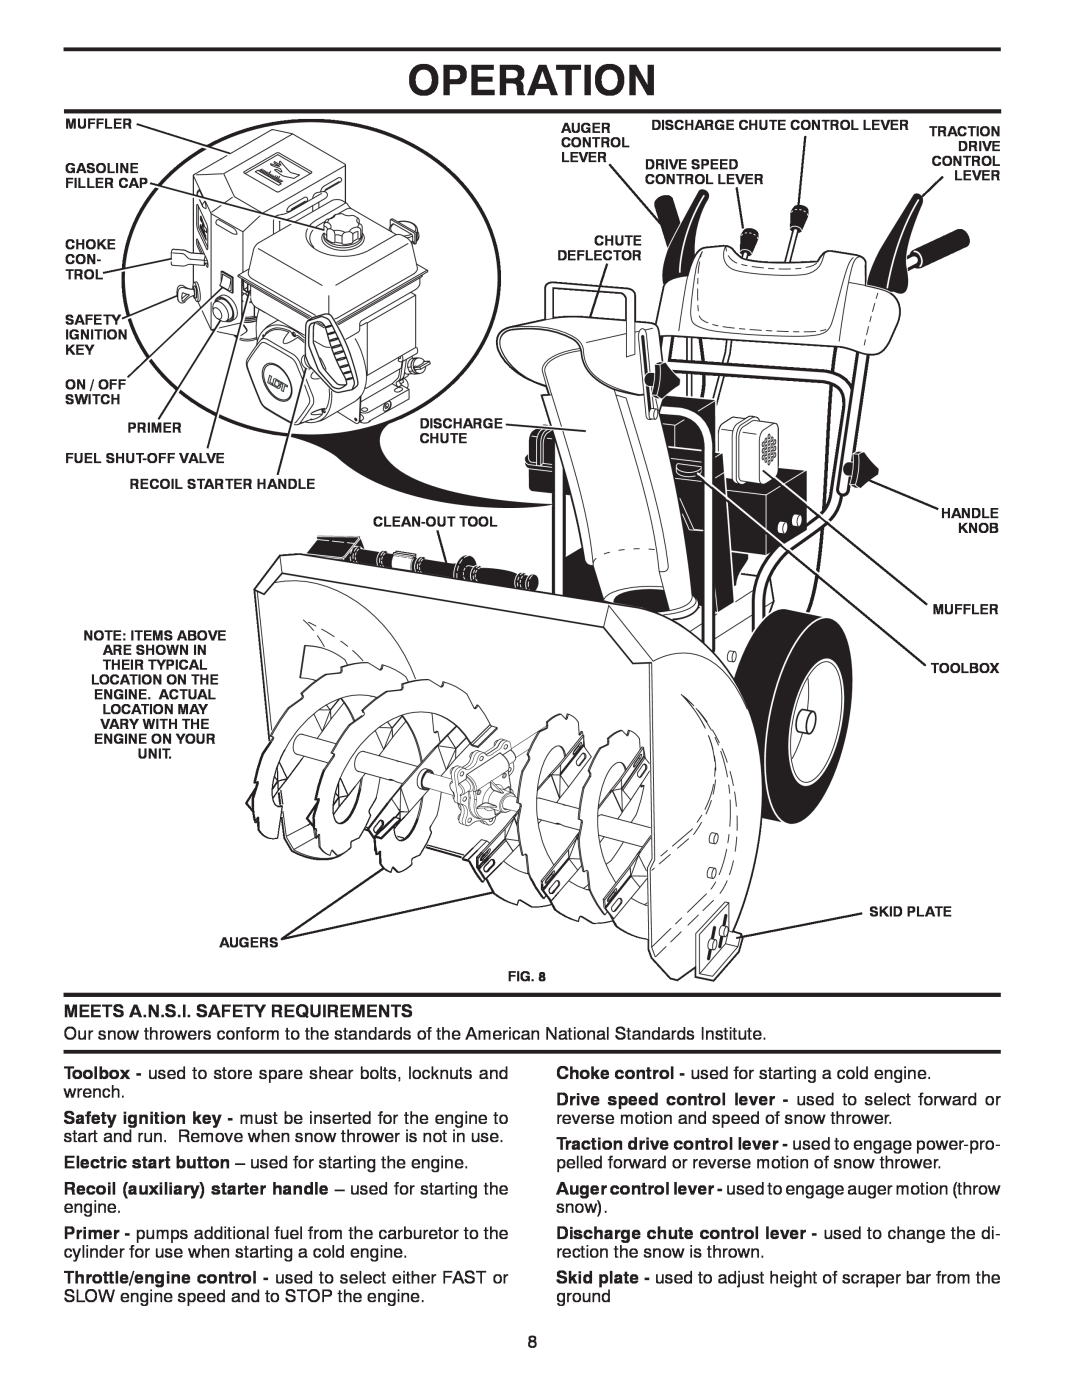 Poulan 421602 owner manual Operation, Meets A.N.S.I. Safety Requirements 